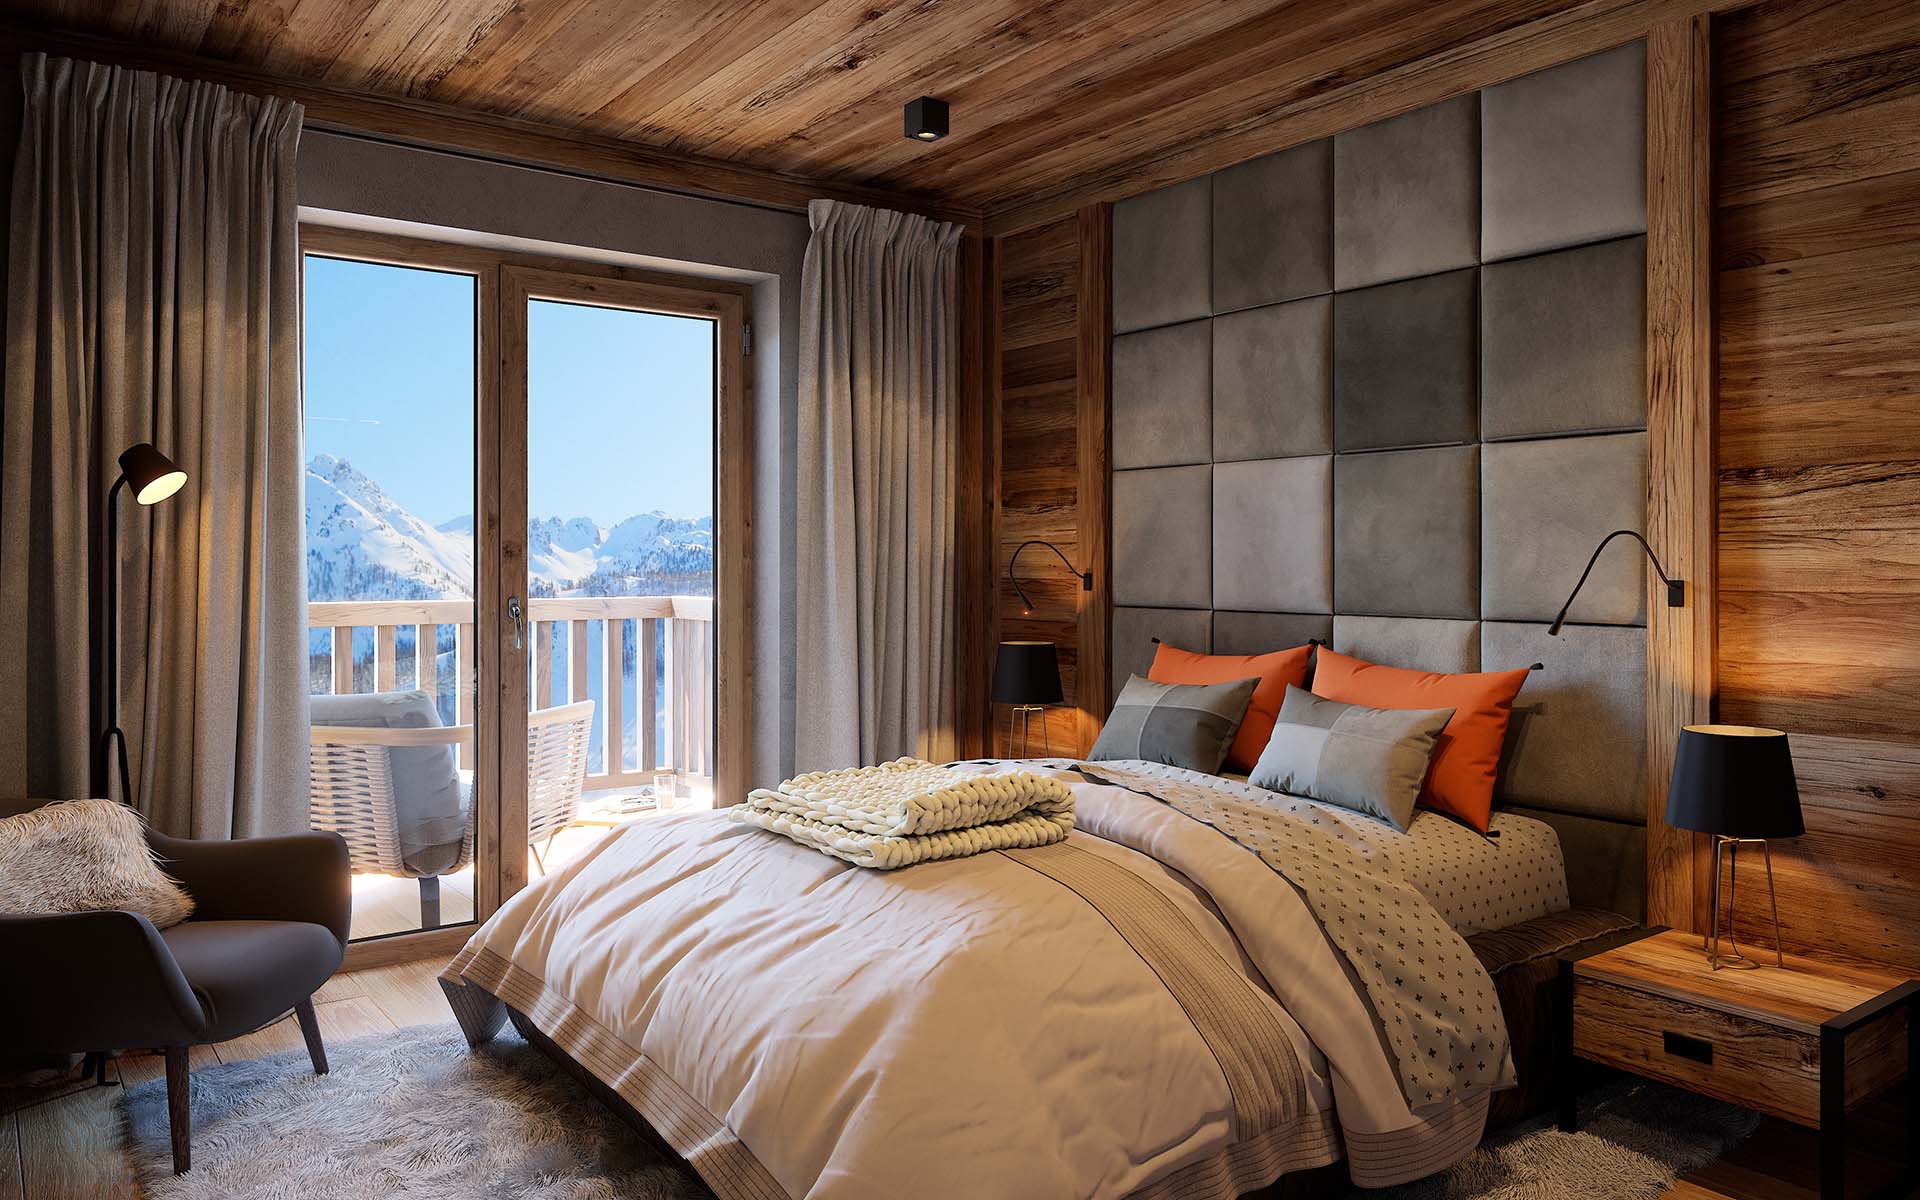 3D Perspective view of a room of a luxurious chalet created by a professional 3D architect.